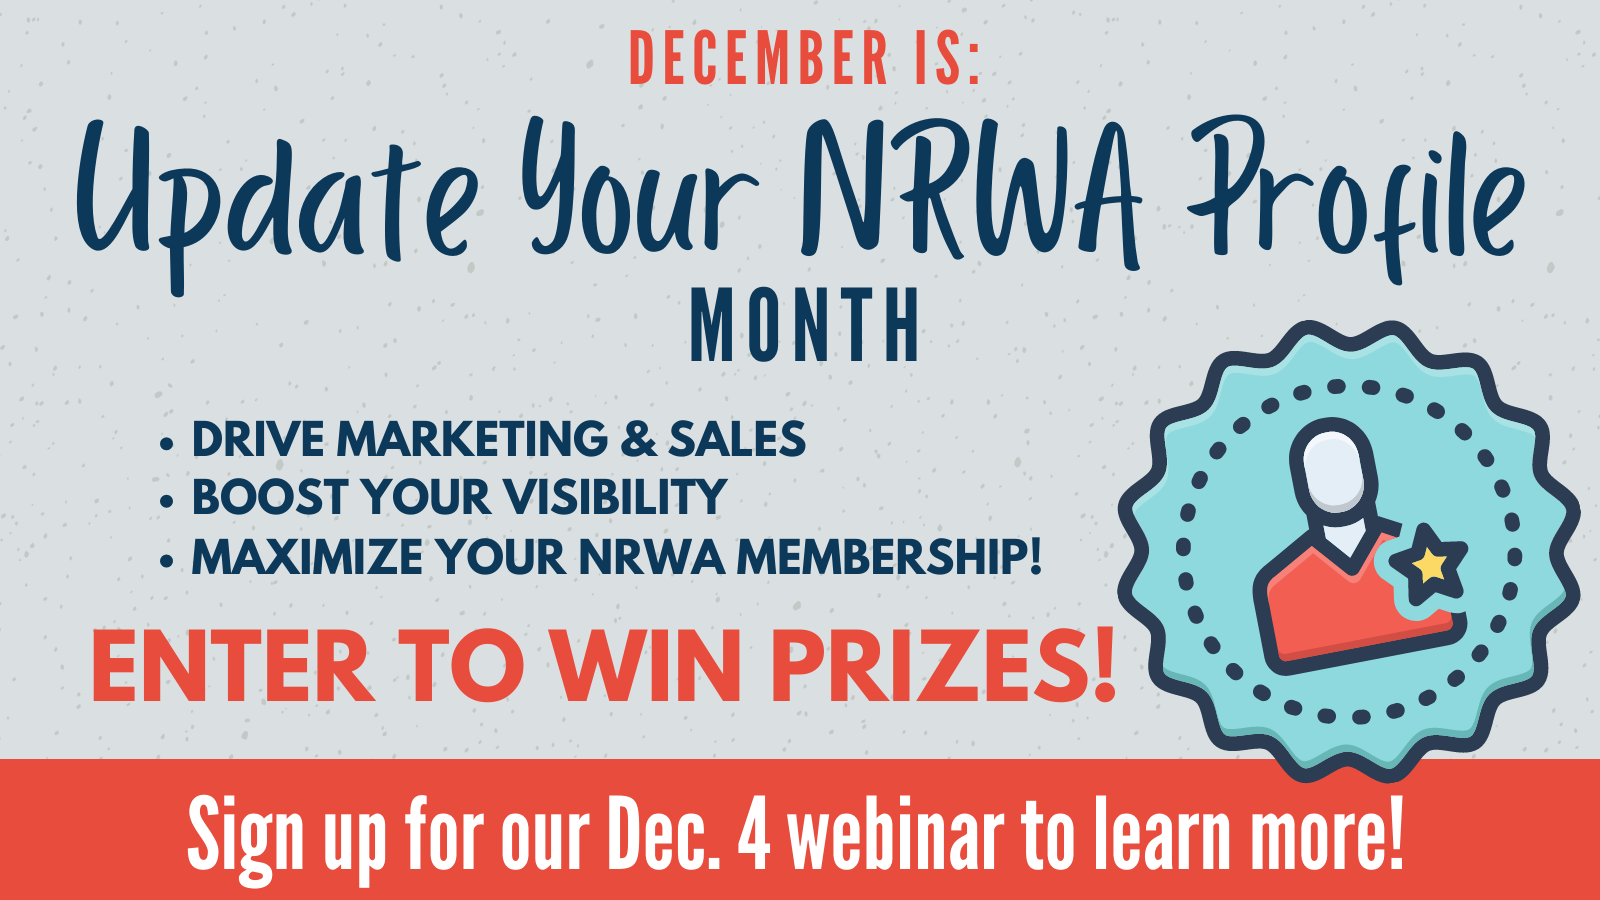 December is Update Your NRWA Profile Month - Sign up for our December 4 webinar to learn more!